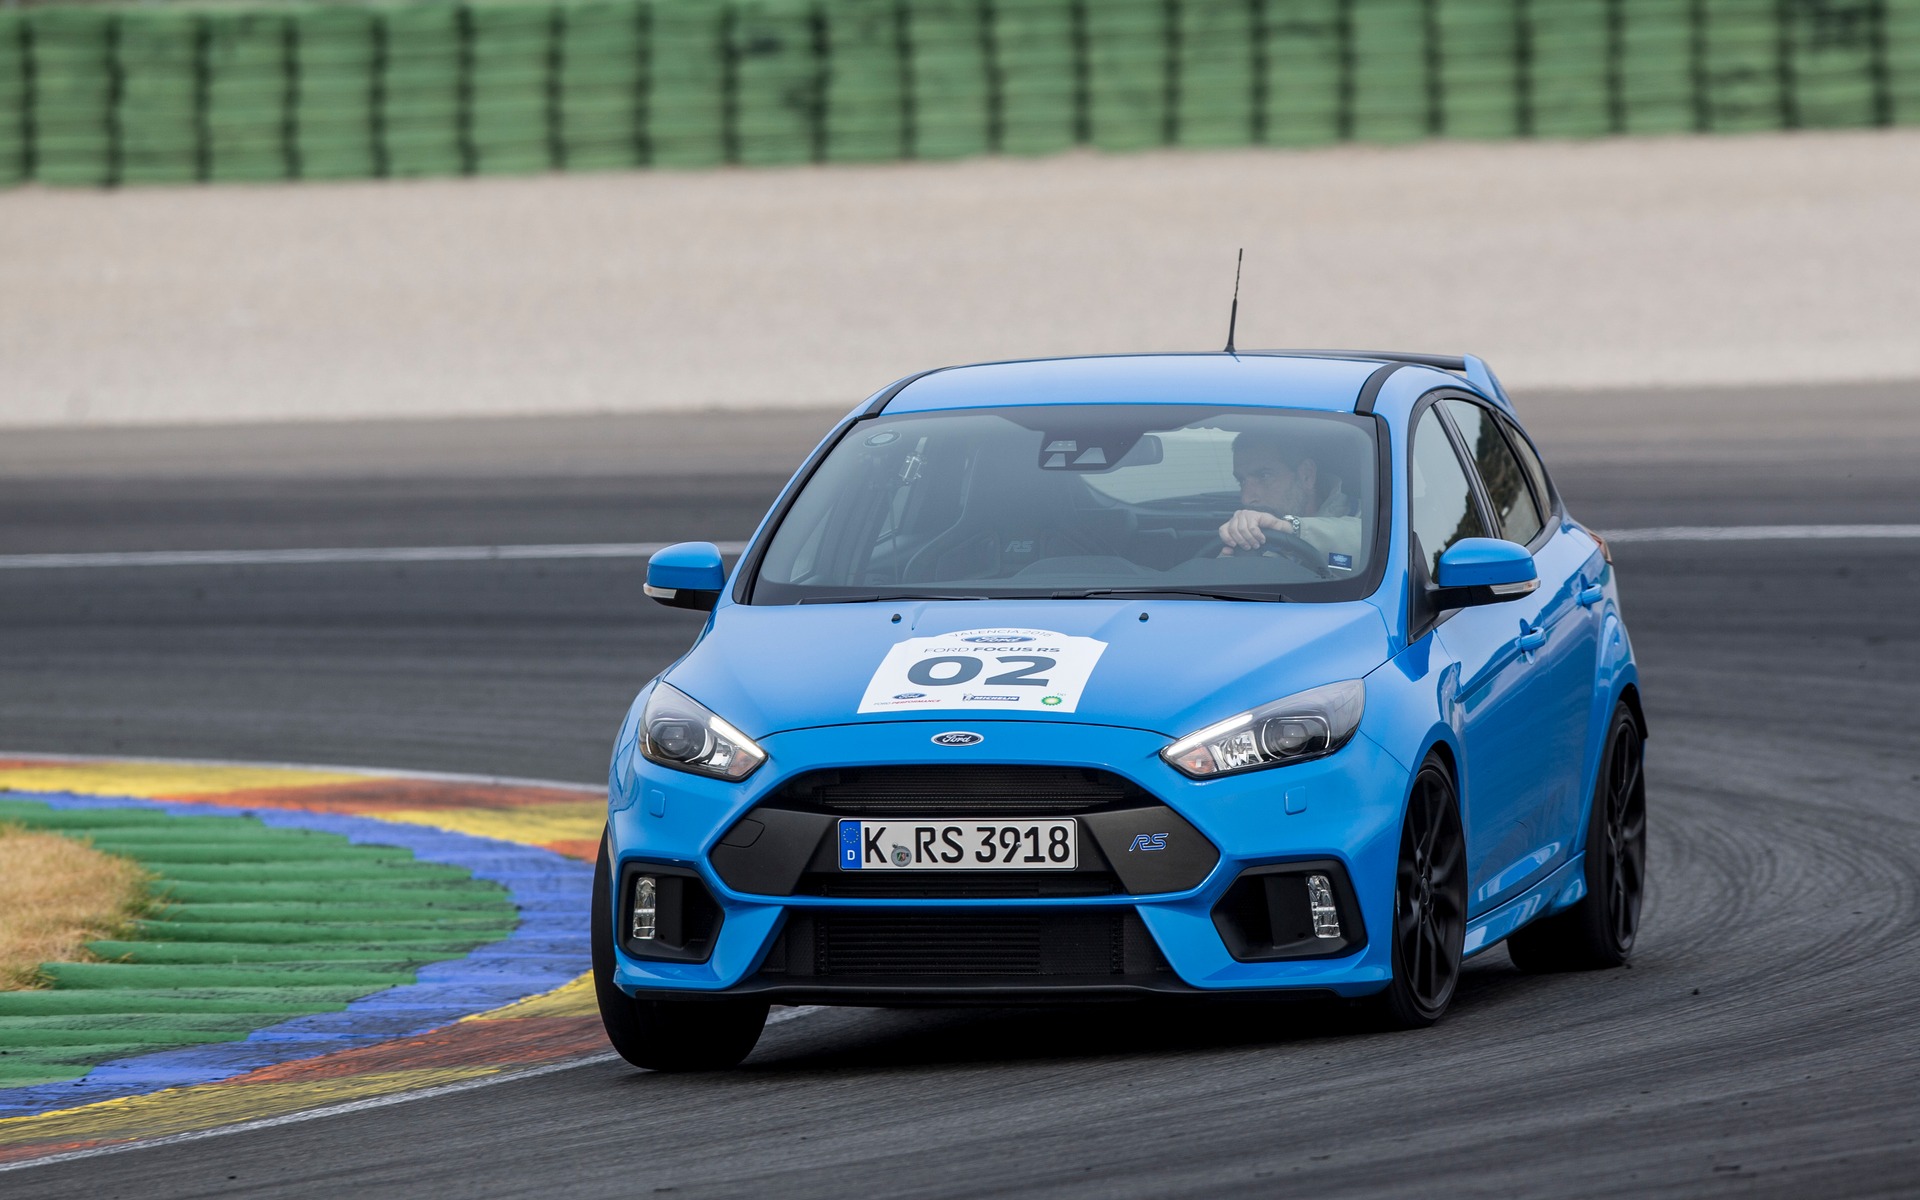 Ford Focus mk 3 specification guide